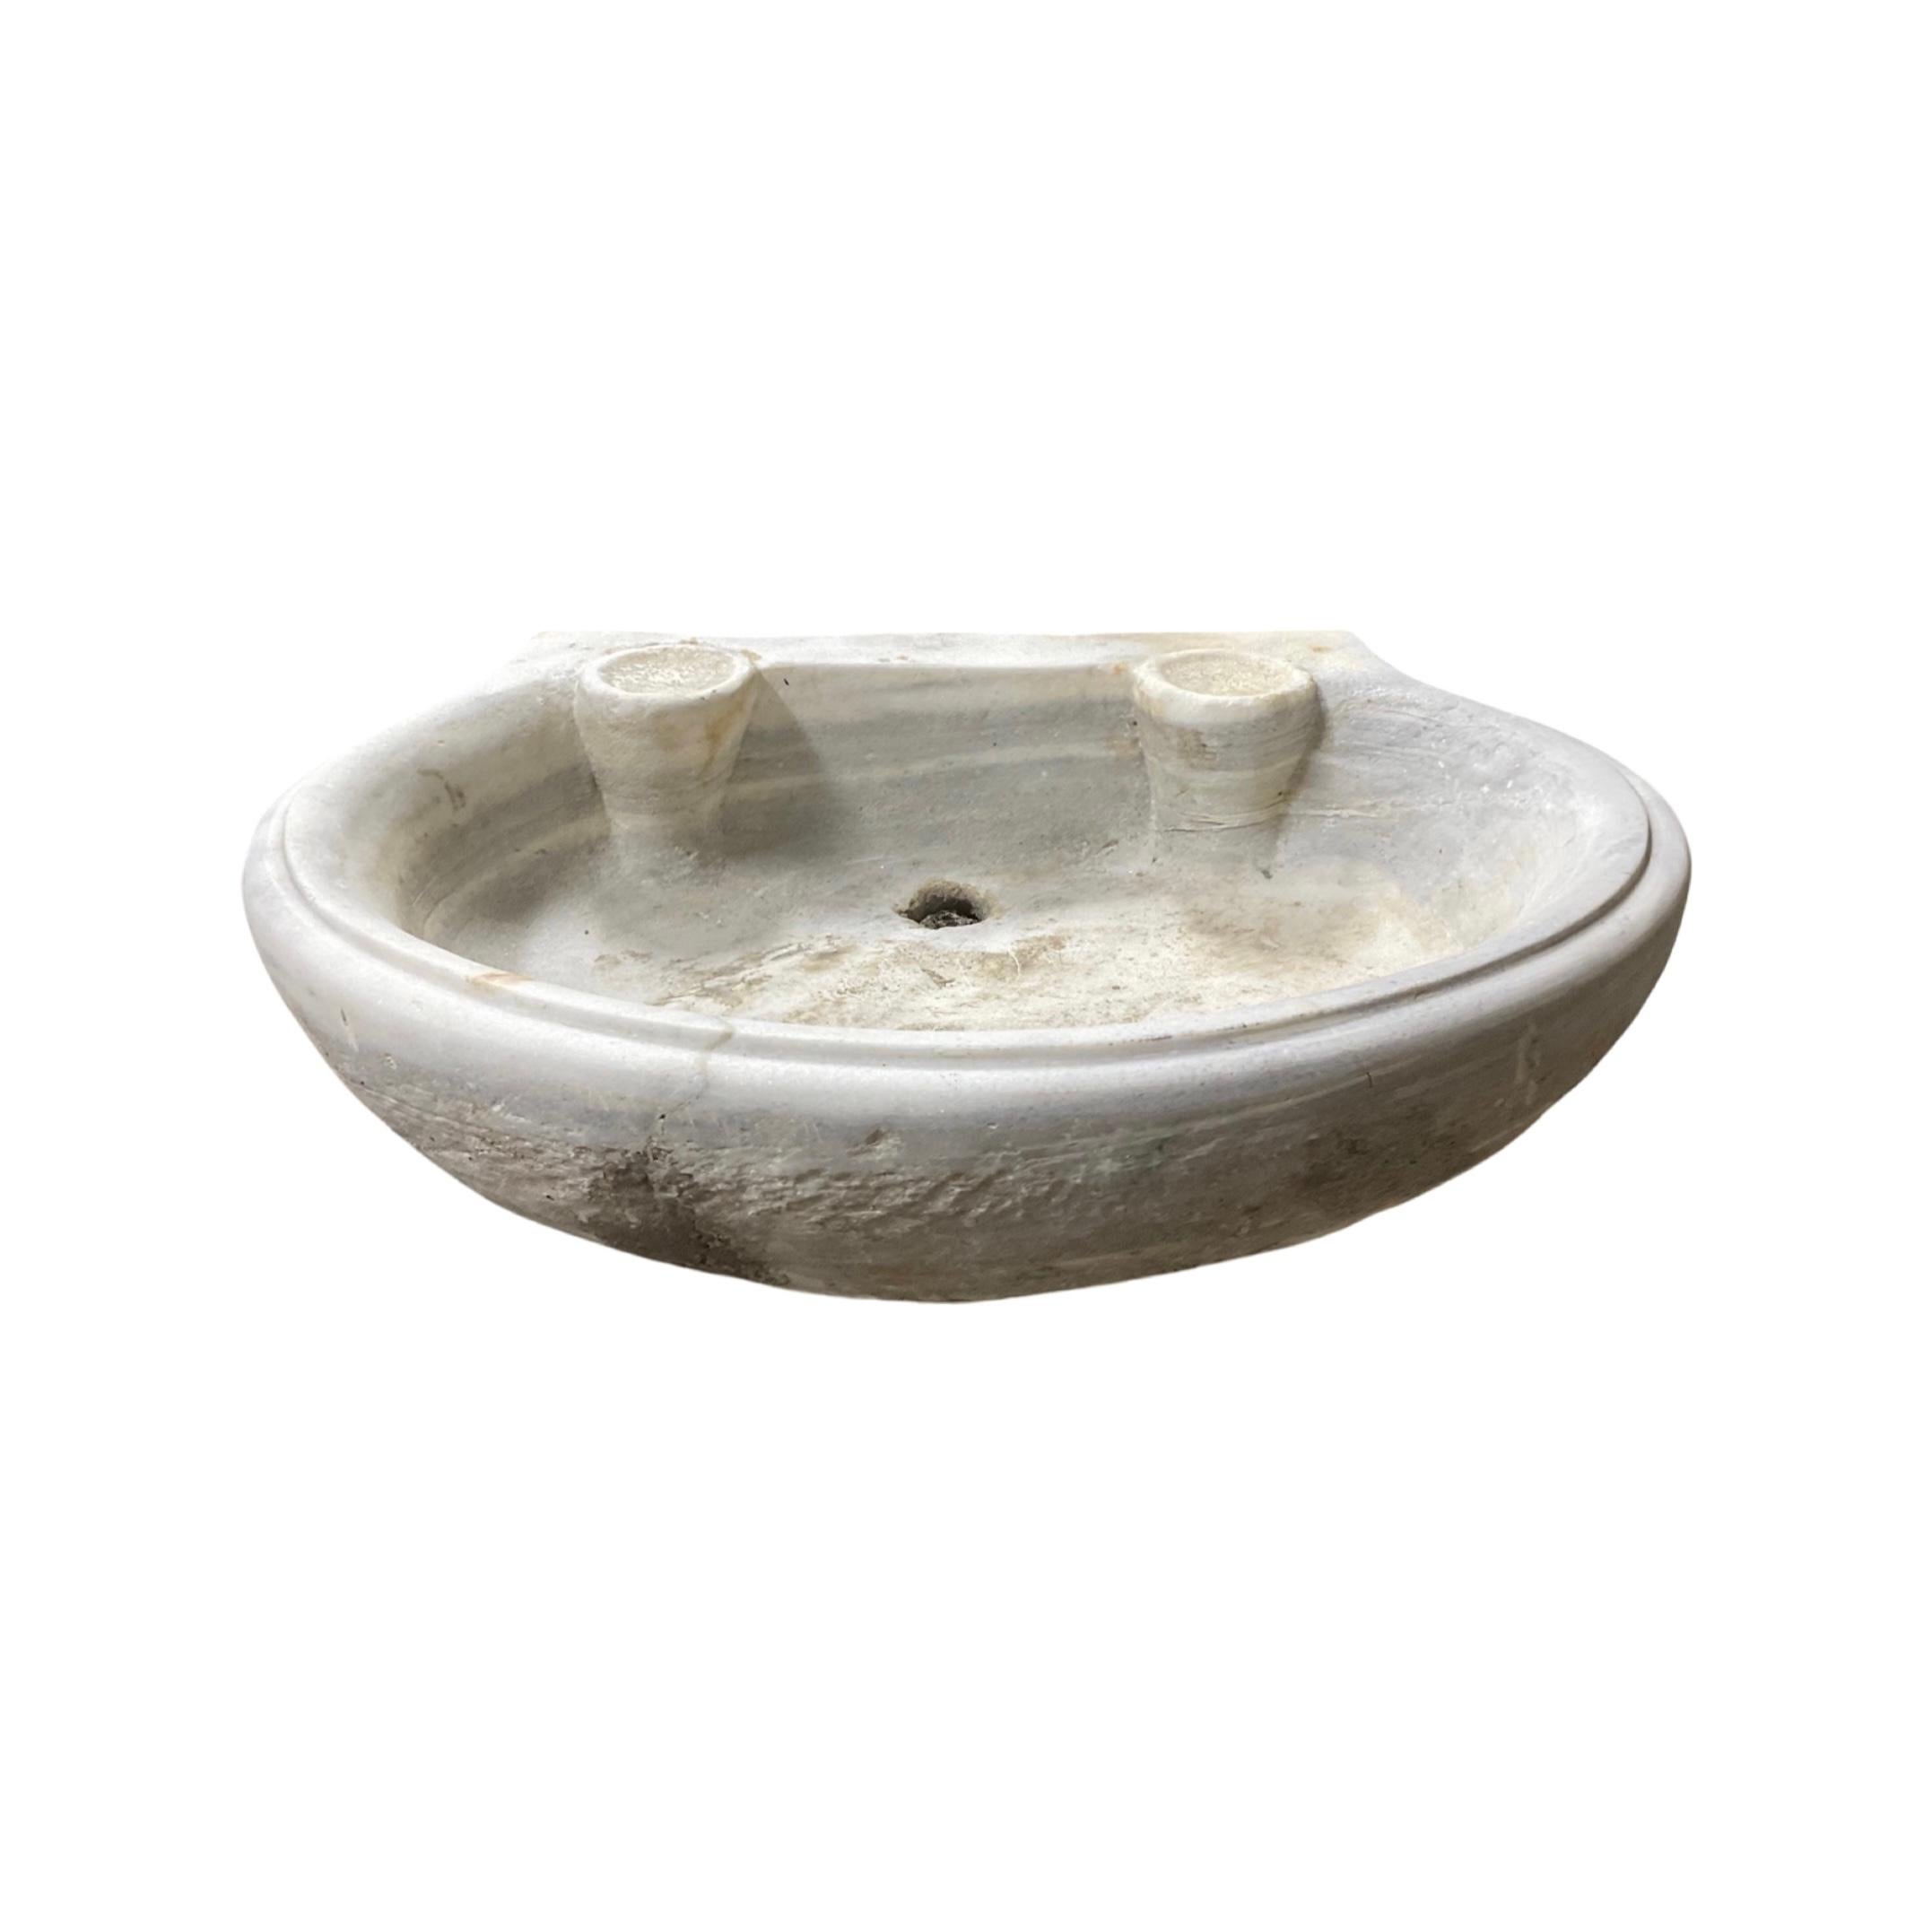 This French White Marble Sink is a timeless classic, constructed with the same quality materials used in 18th century Europe. Its elegant design is perfect for any traditional style bathroom, offering a long-lasting, luxurious look and feel.